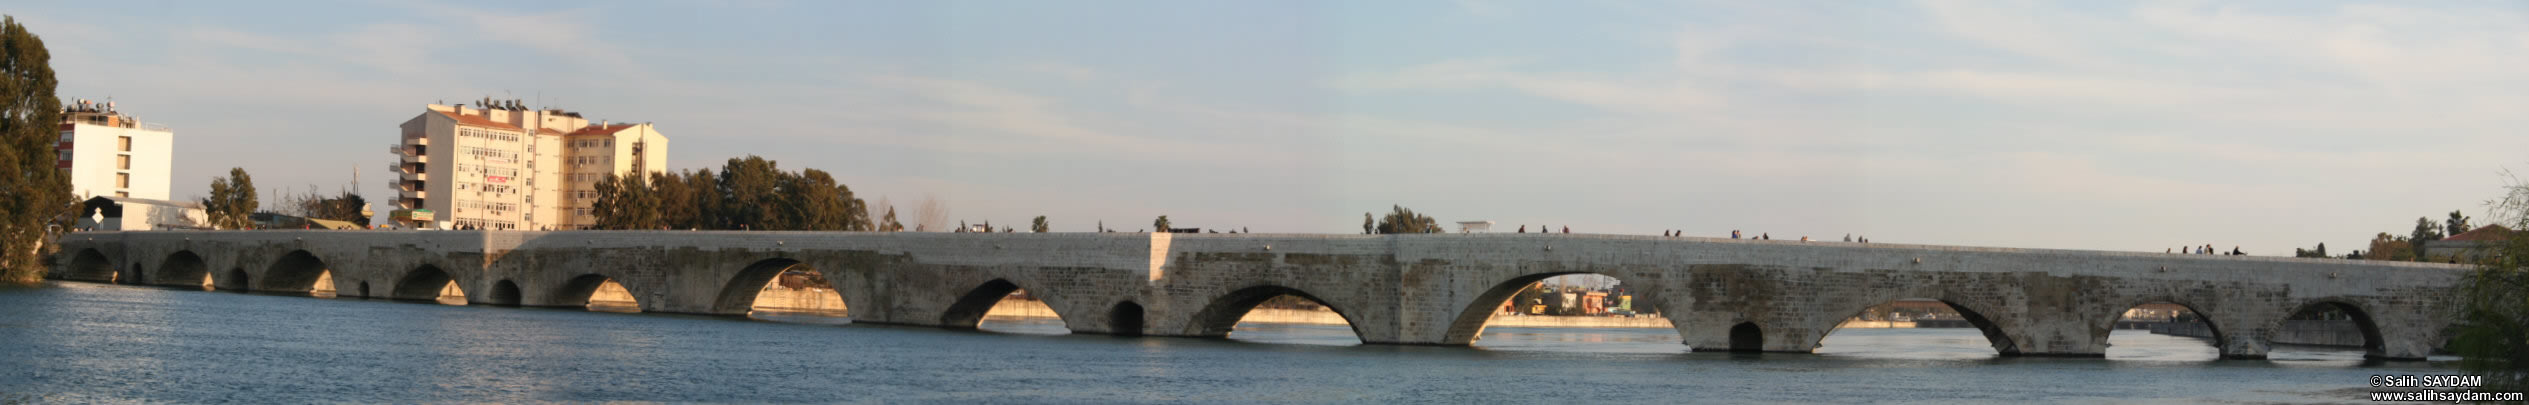 Panorama #01 of Taskopru (Stone Bridge), which was build over the River Seyhan by the Roman Emperor Hadrianus in the 4th century.